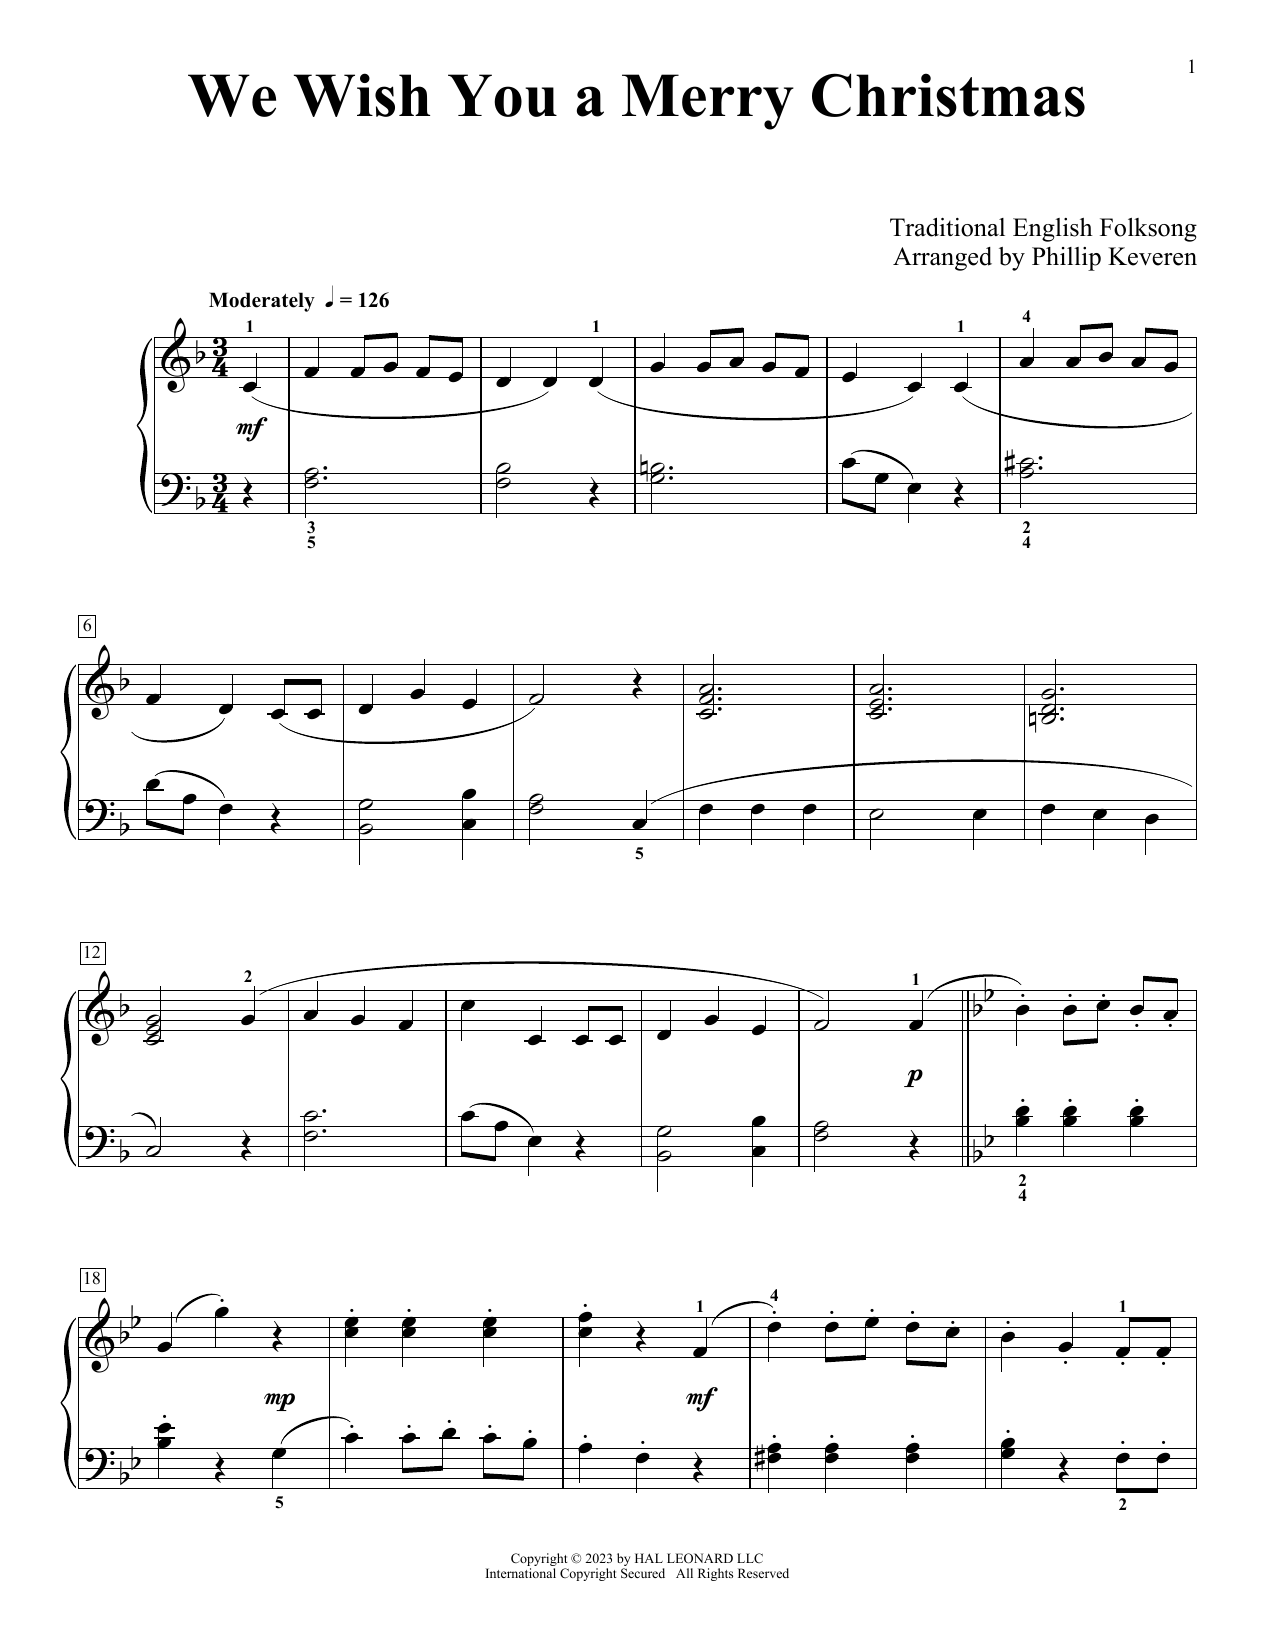 Traditional English Folksong We Wish You A Merry Christmas (arr. Phillip Keveren) sheet music notes printable PDF score